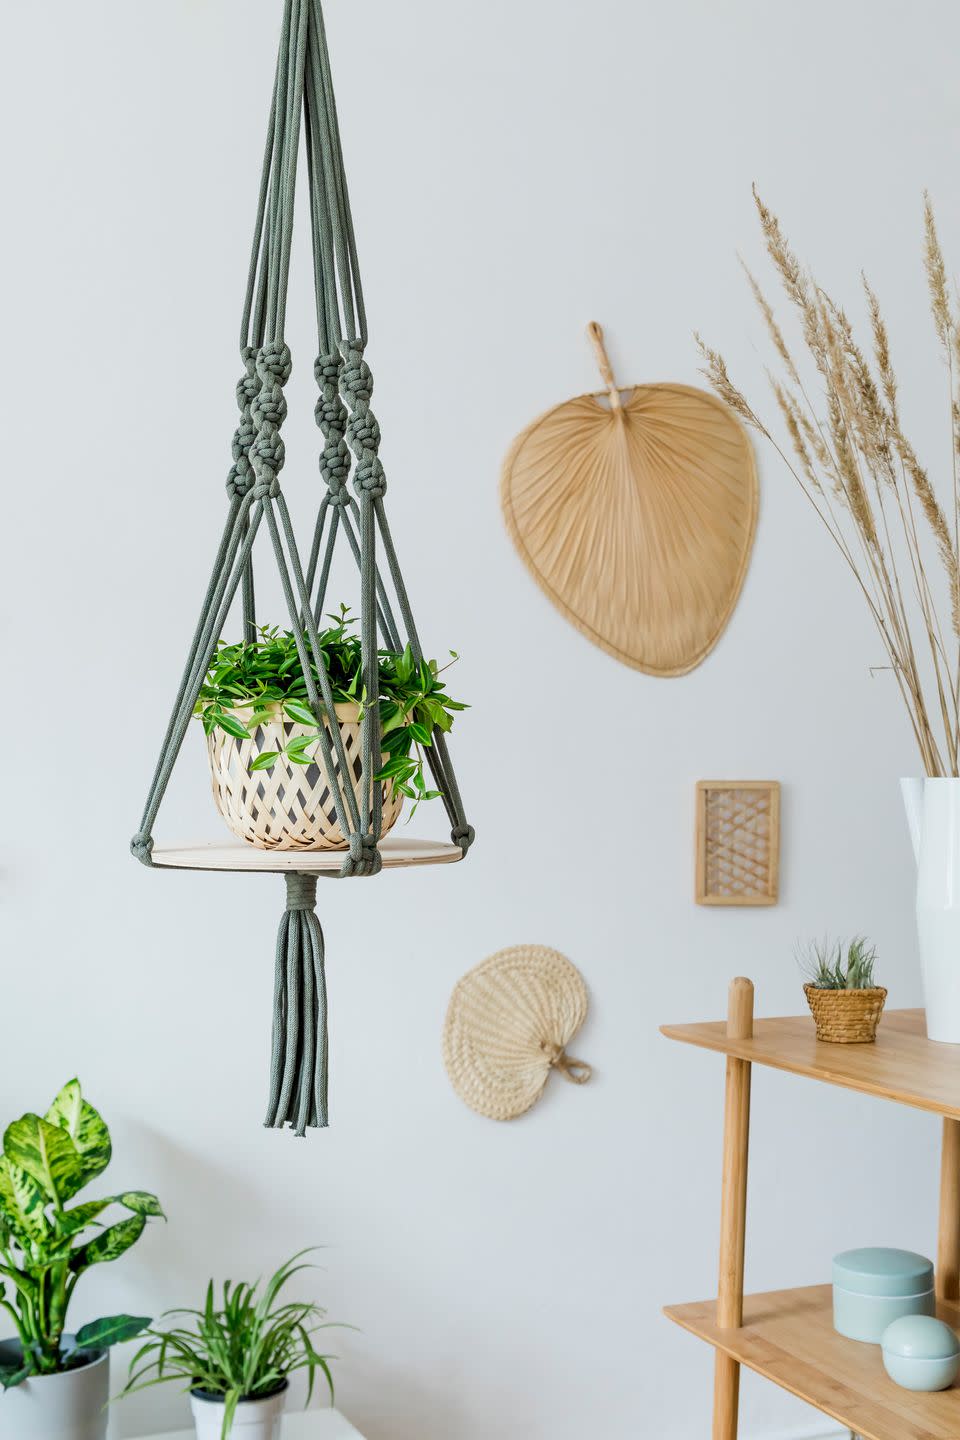 <p>Macramé, created by tying cords into knots, was all the rage in 70s homes, used for everything from potted-plant holders to decorative wall hangings in the shape of owls. </p>